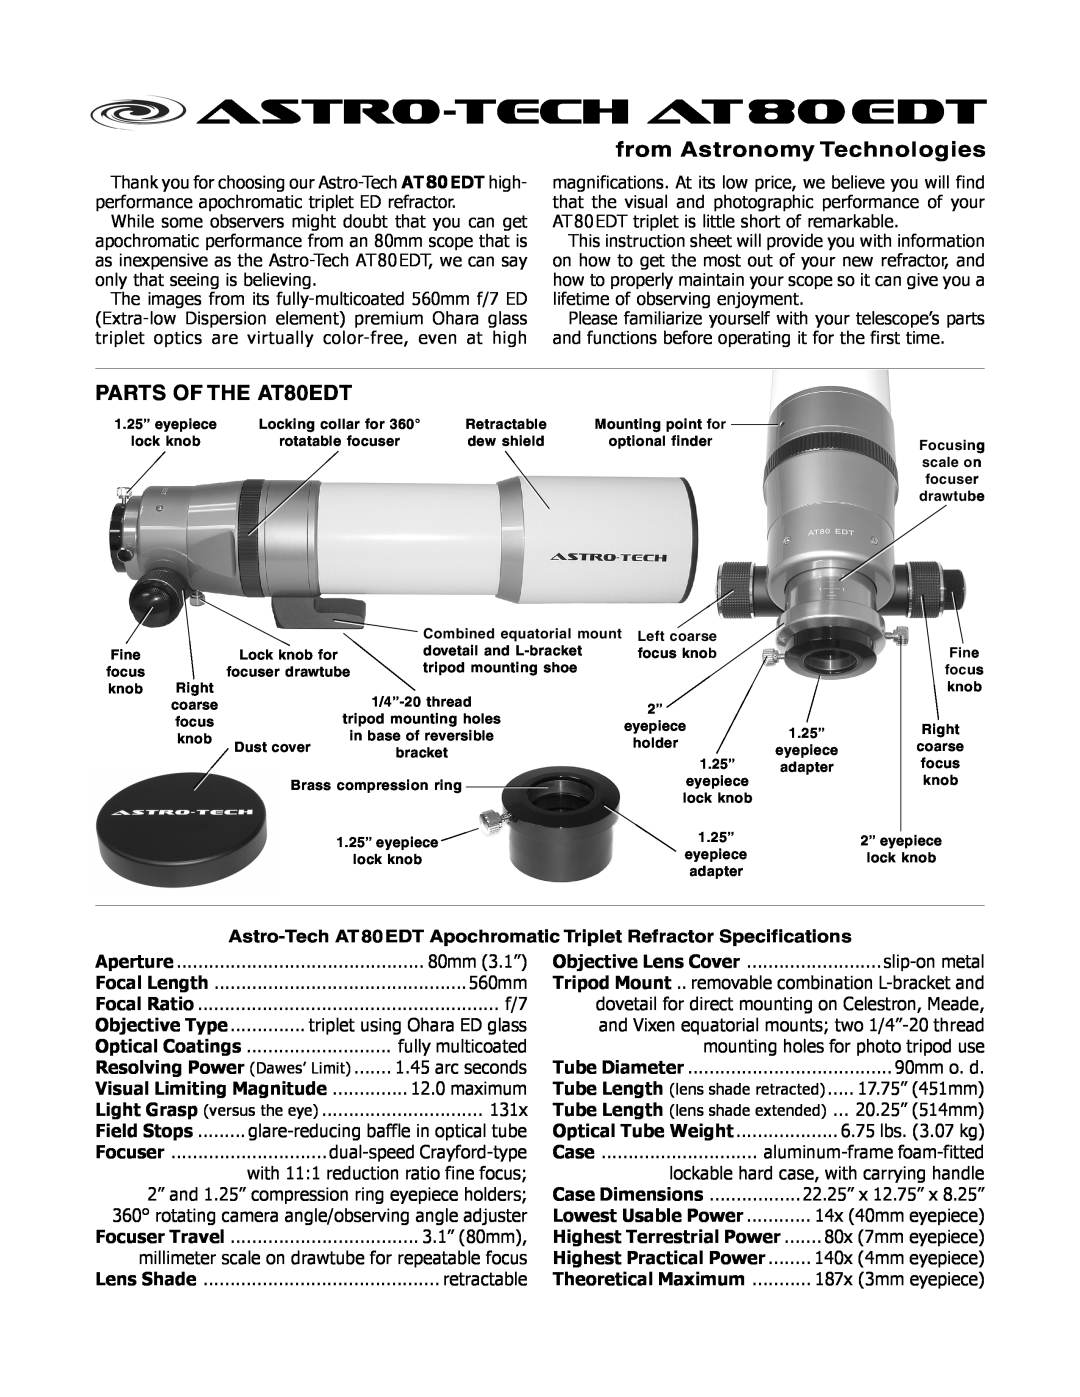 Meade instruction sheet astro-techAT80EDT, from Astronomy Technologies, PARTS OF THE AT80EDT, Visual Limiting Magnitude 